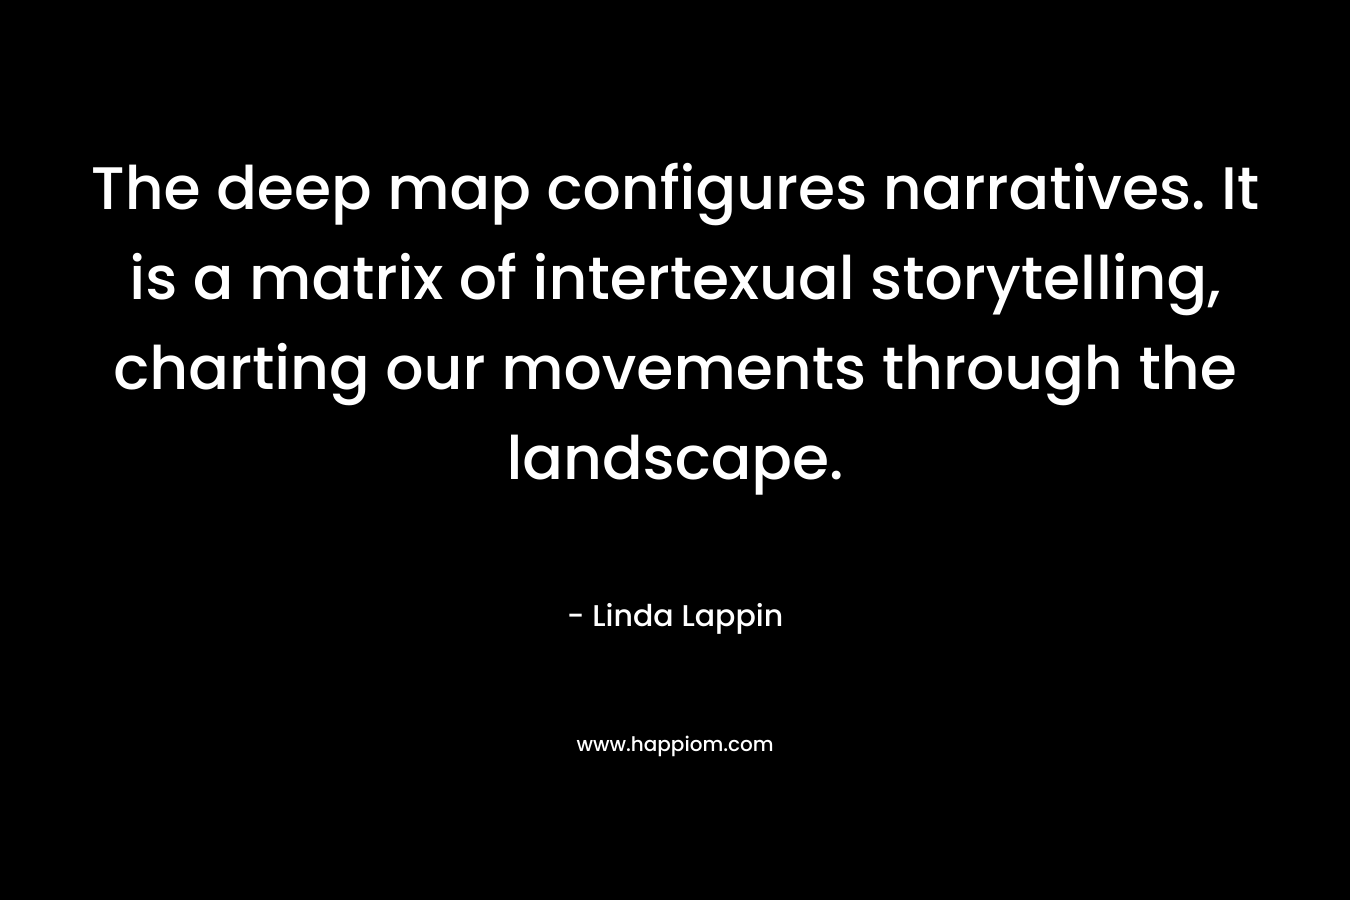 The deep map configures narratives. It is a matrix of intertexual storytelling, charting our movements through the landscape. – Linda Lappin